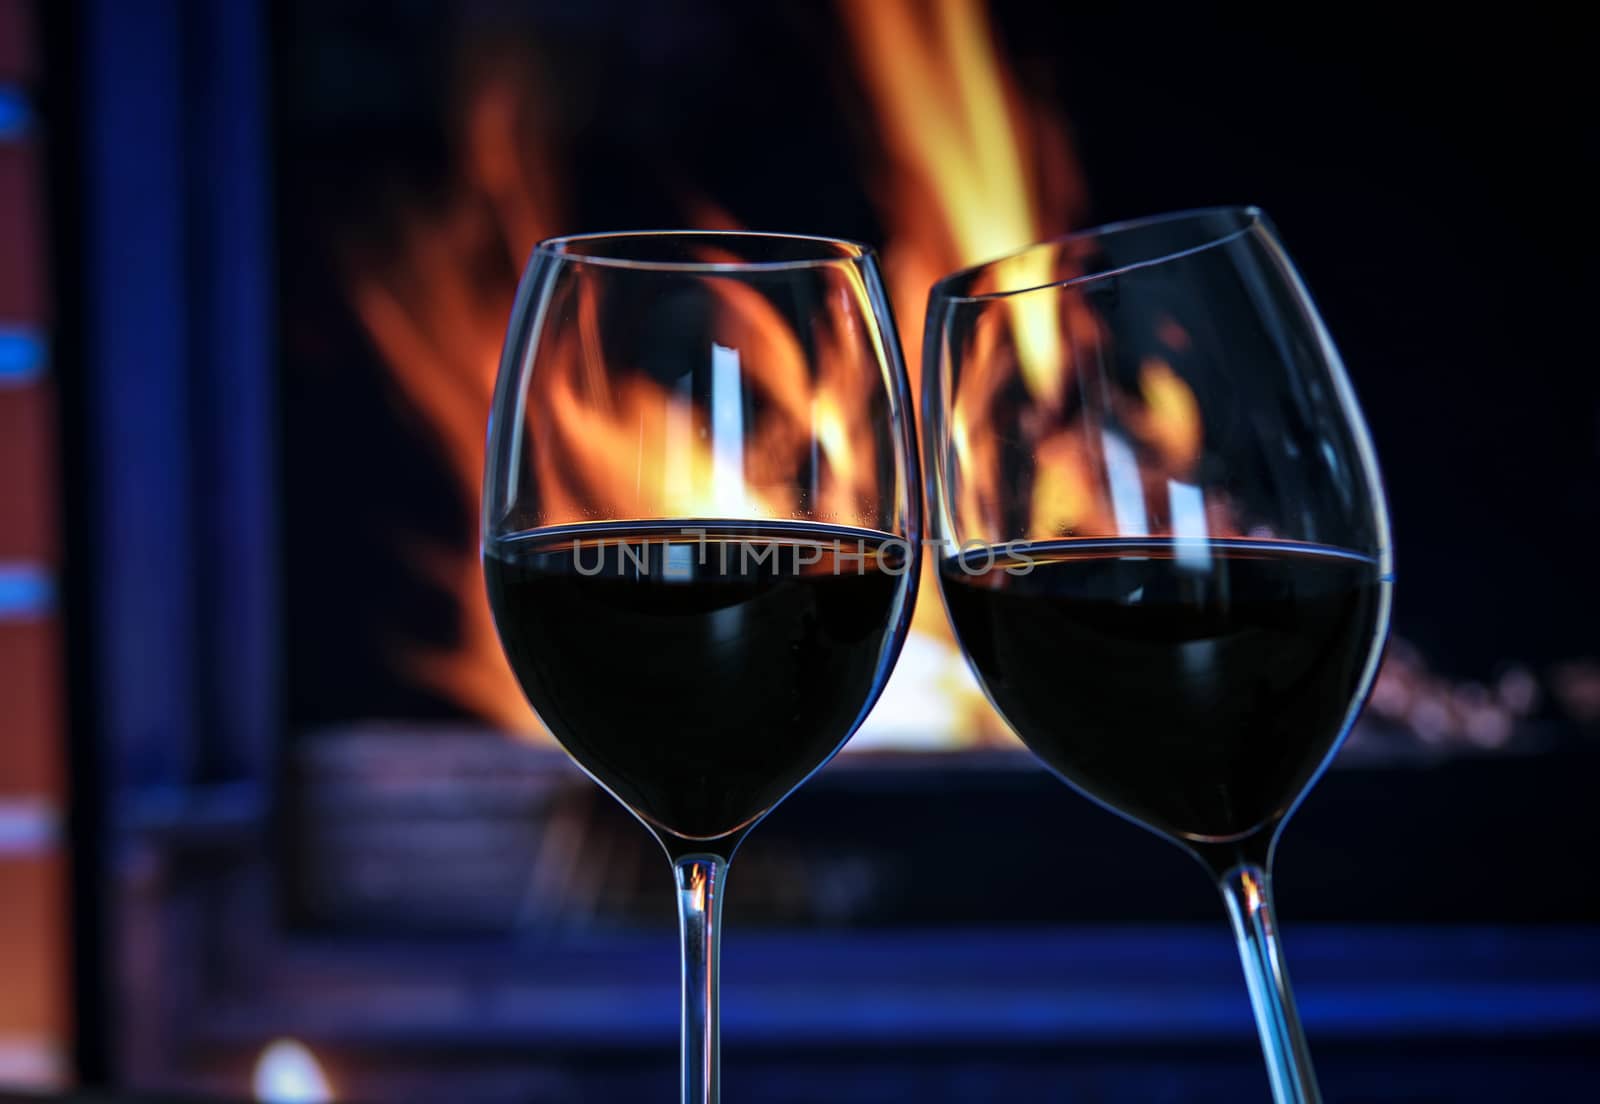 Two glasses of red wine raised in a toast against a fire in the fireplace.